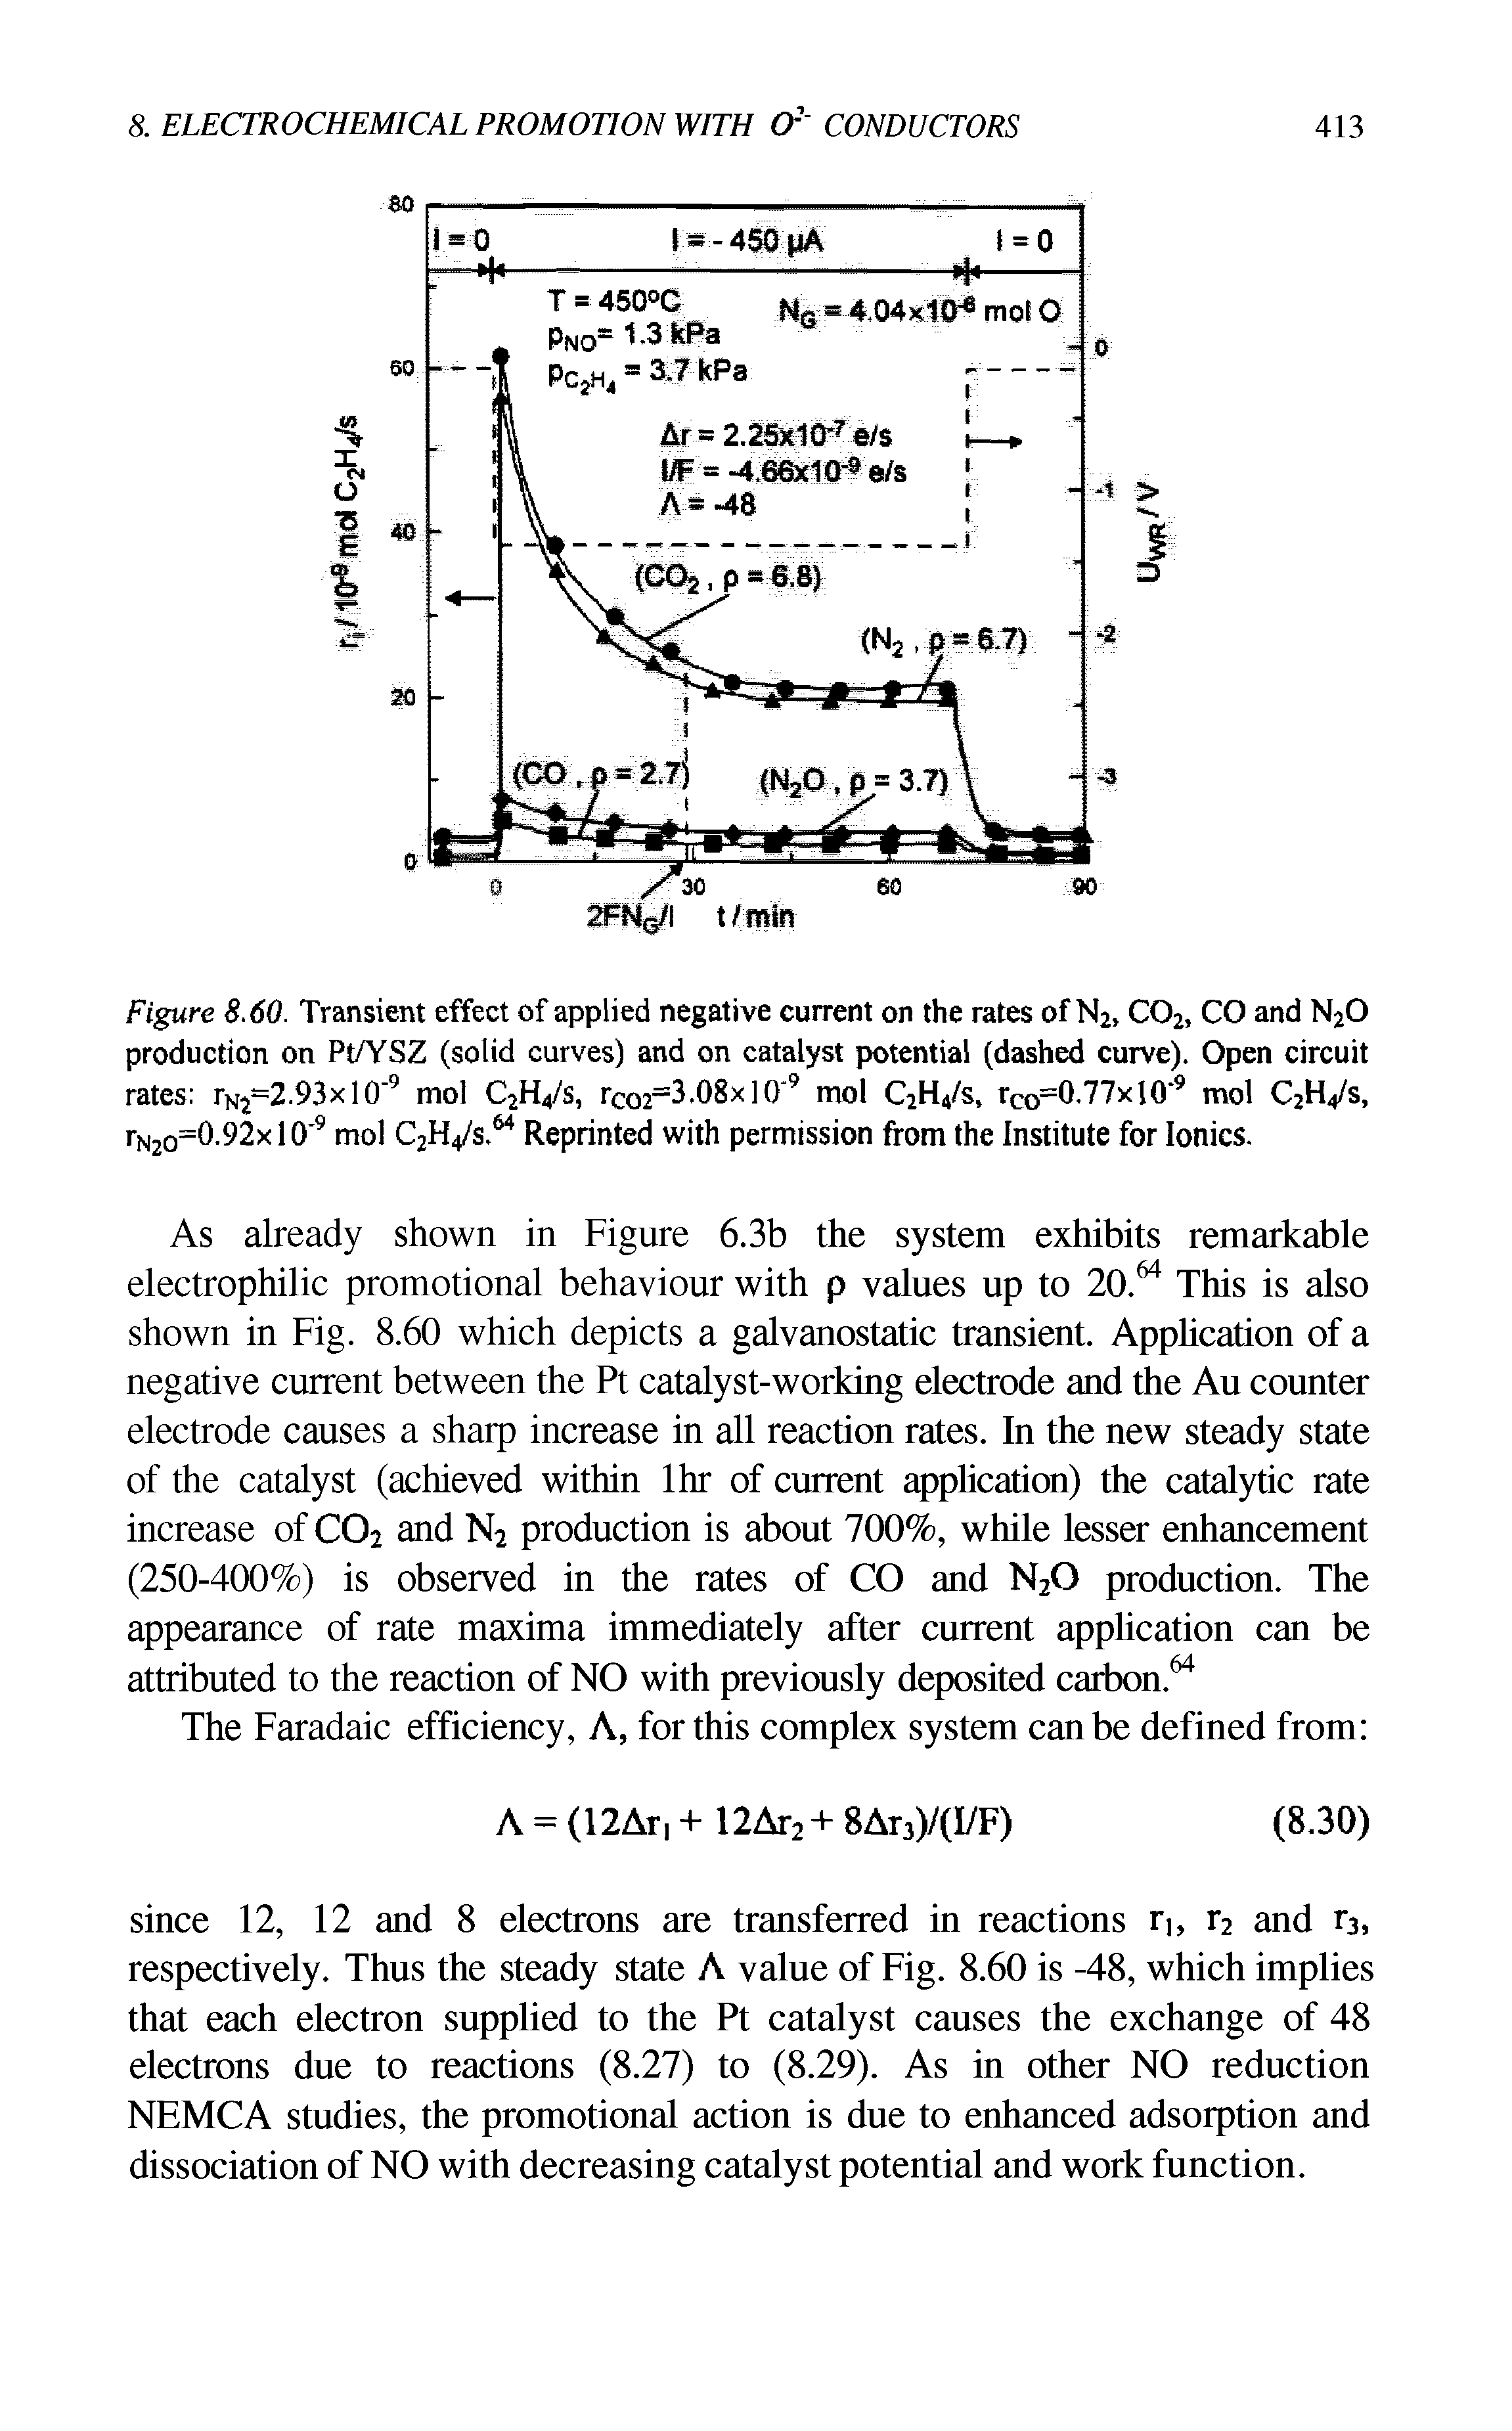 Figure 8.60. Transient effect of applied negative current on the rates of N2, C02, CO and N20 production on Pt/YSZ (solid curves) and on catalyst potential (dashed curve). Open circuit rates rN2=2.93xlO 9 mol C2H4/s, rco2=3.08x]0 9 mol C2H4/s, rco-0.77xl0 9 mol QH4/S, rN2o==0.92xlO 9 mol C2H4/s.64 Reprinted with permission from the Institute for Ionics.